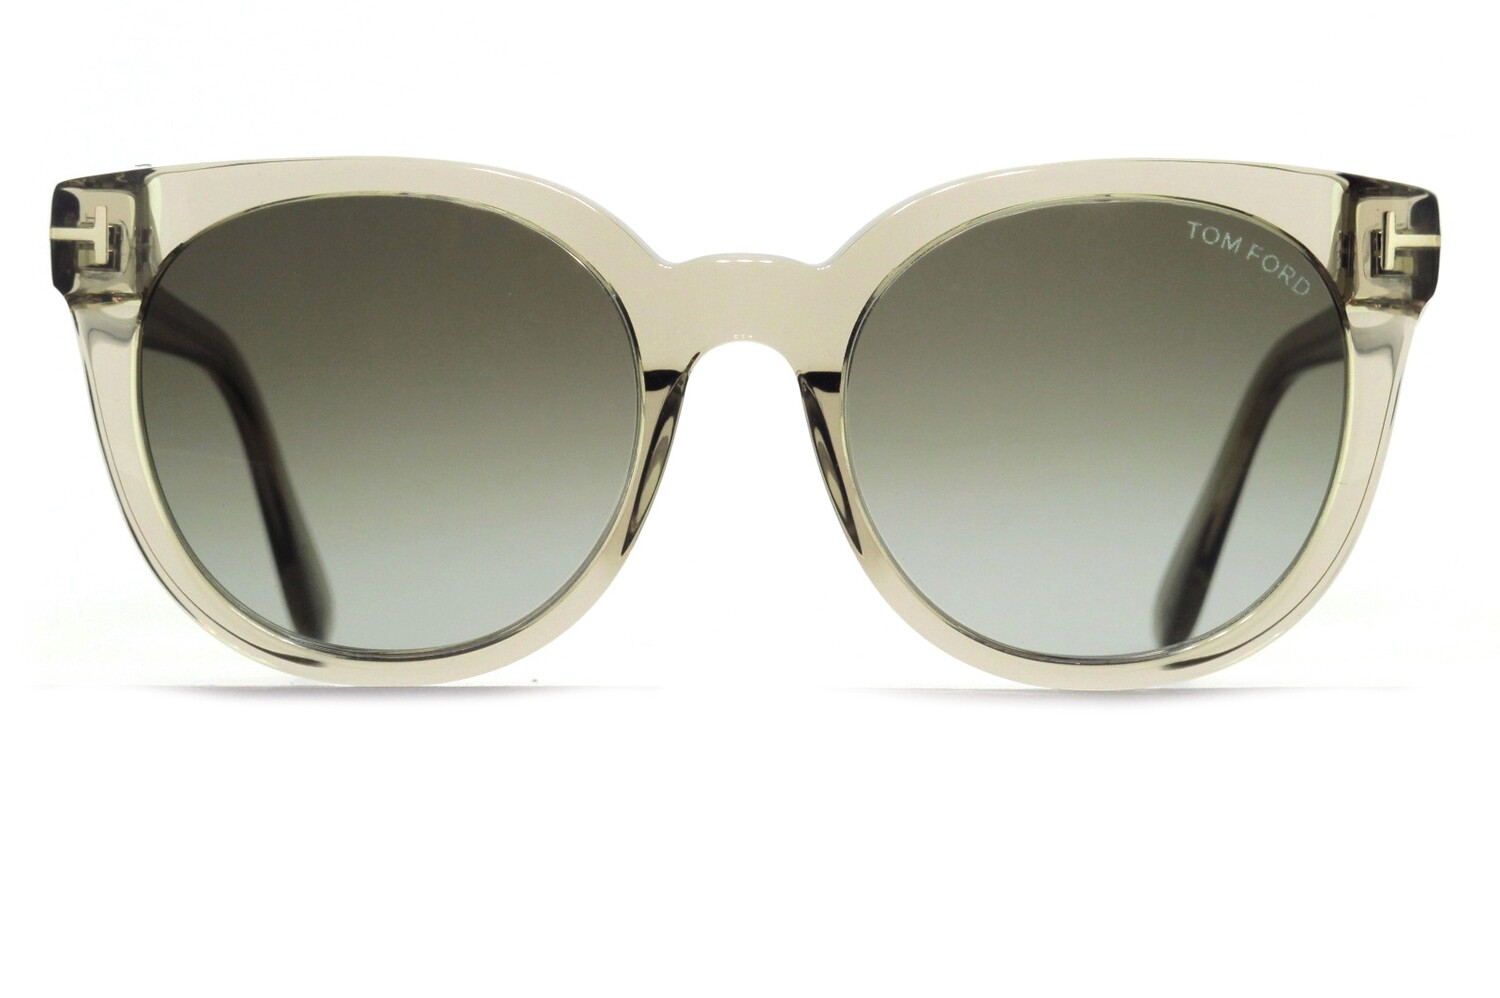 Moira TF1109 by Tom Ford